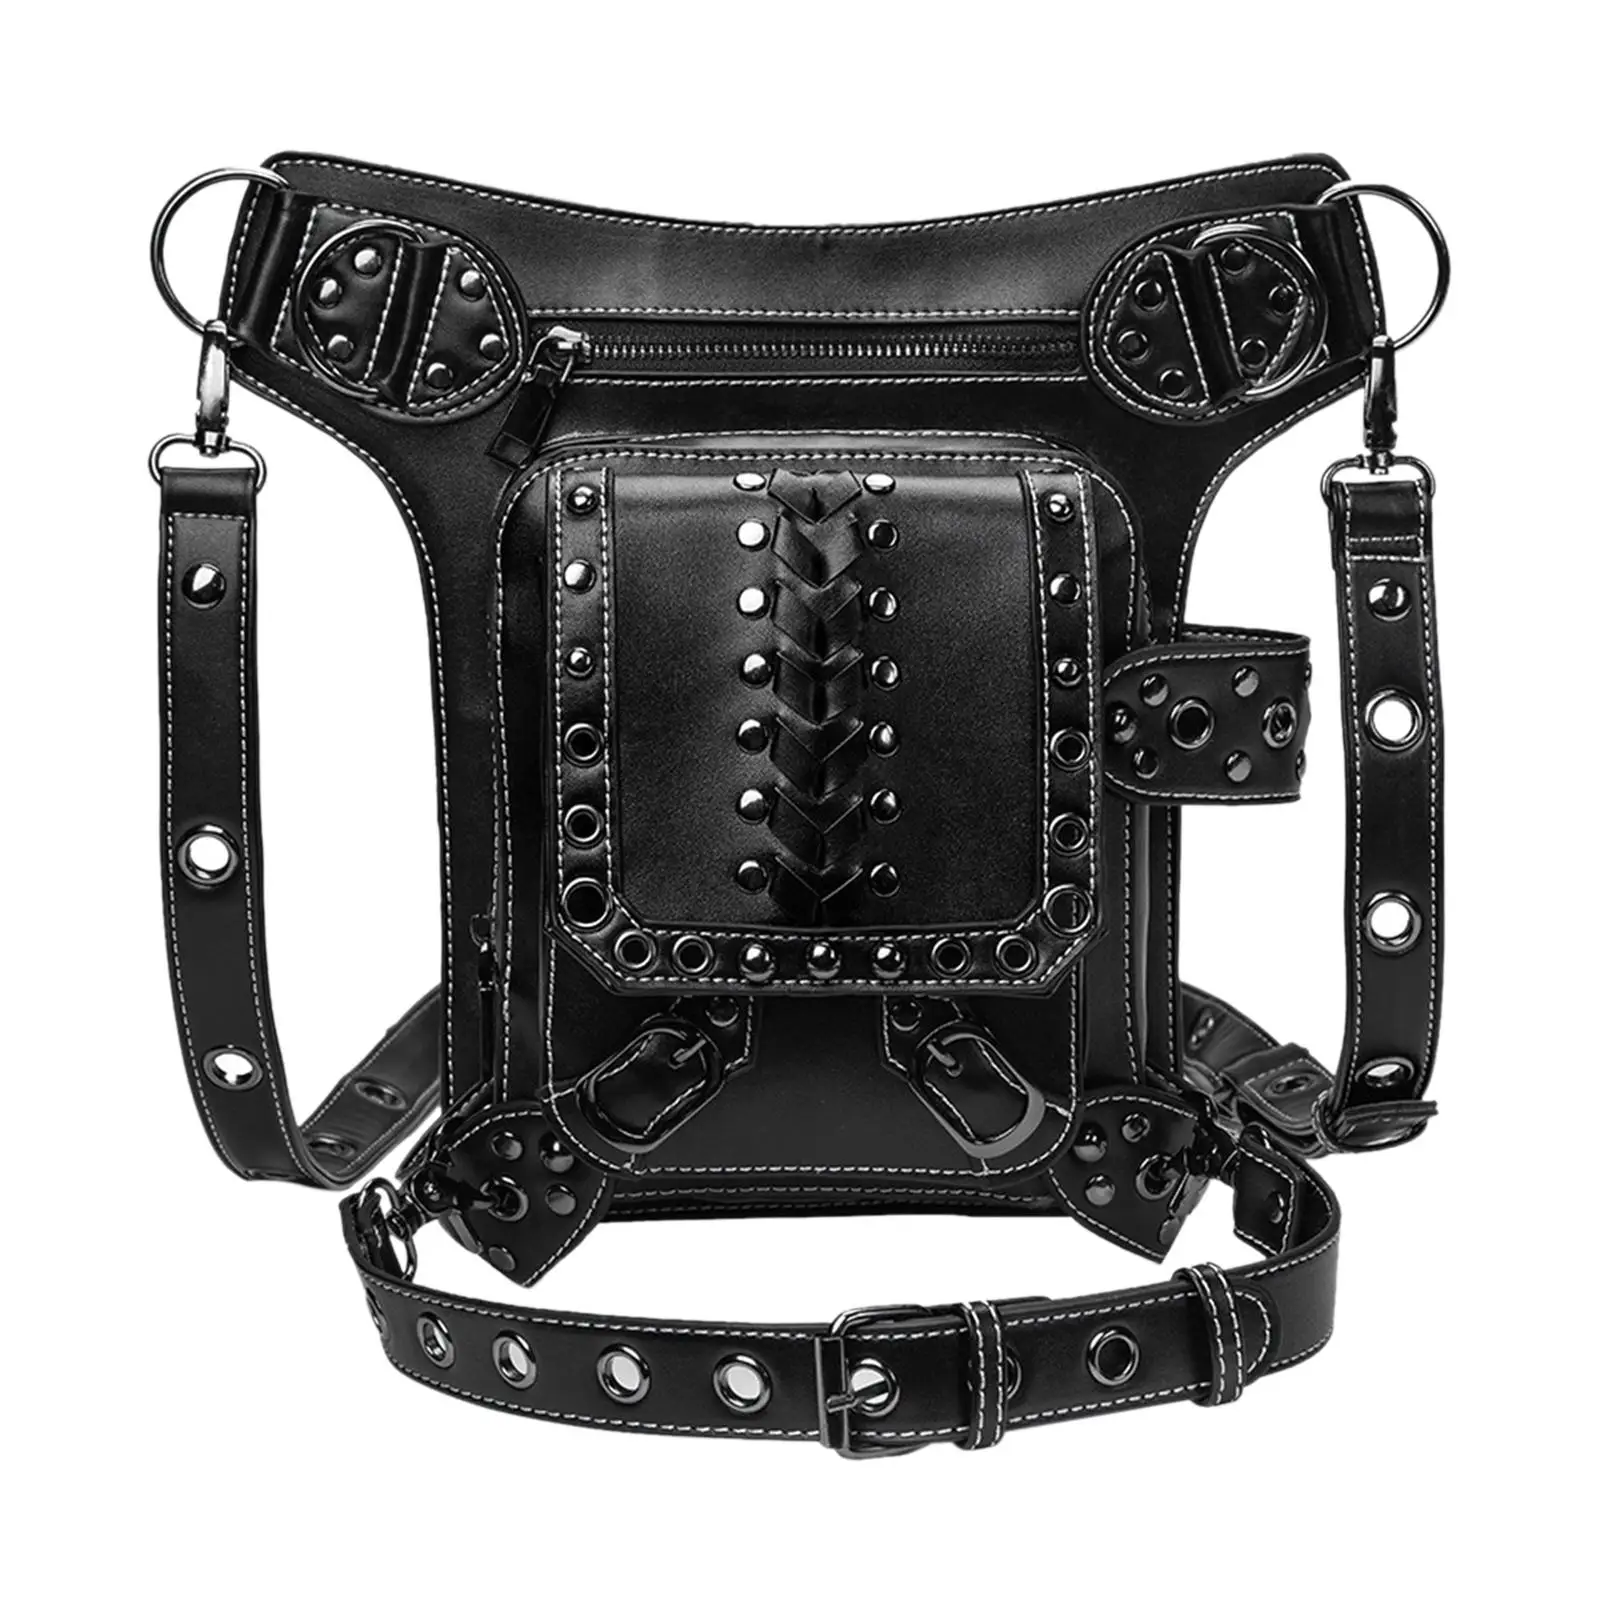 Gothic Steampunk Waist Bag Thigh Hip Adjustable Strap Pouch PU Leather Shoulder Bag Satchel Fanny Pack for Backpacking Camping